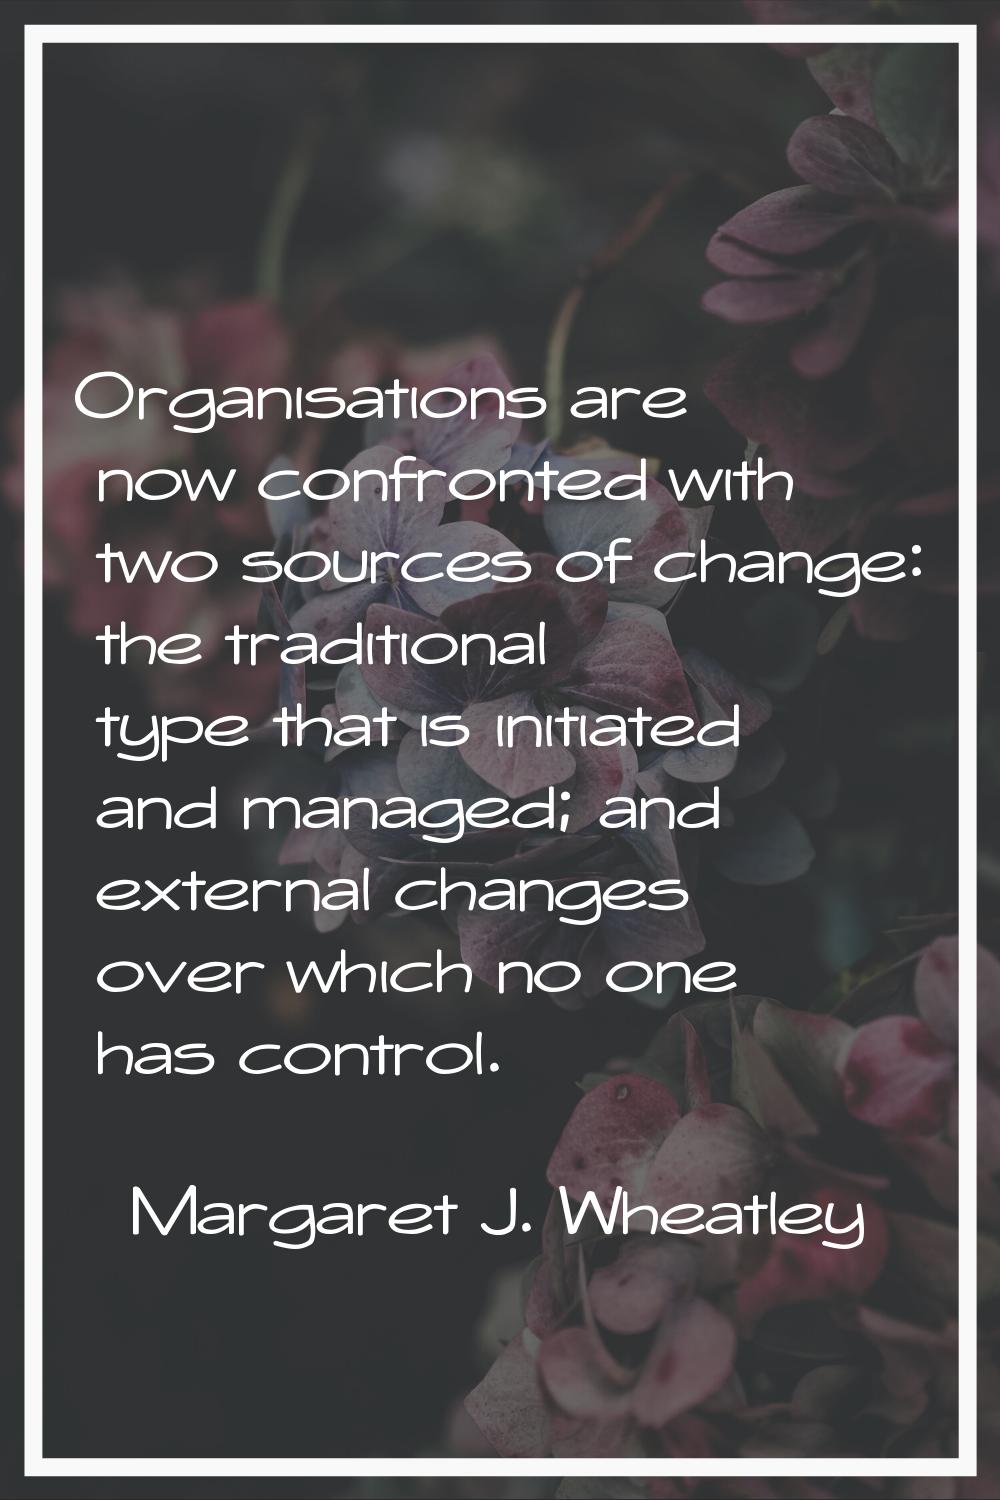 Organisations are now confronted with two sources of change: the traditional type that is initiated